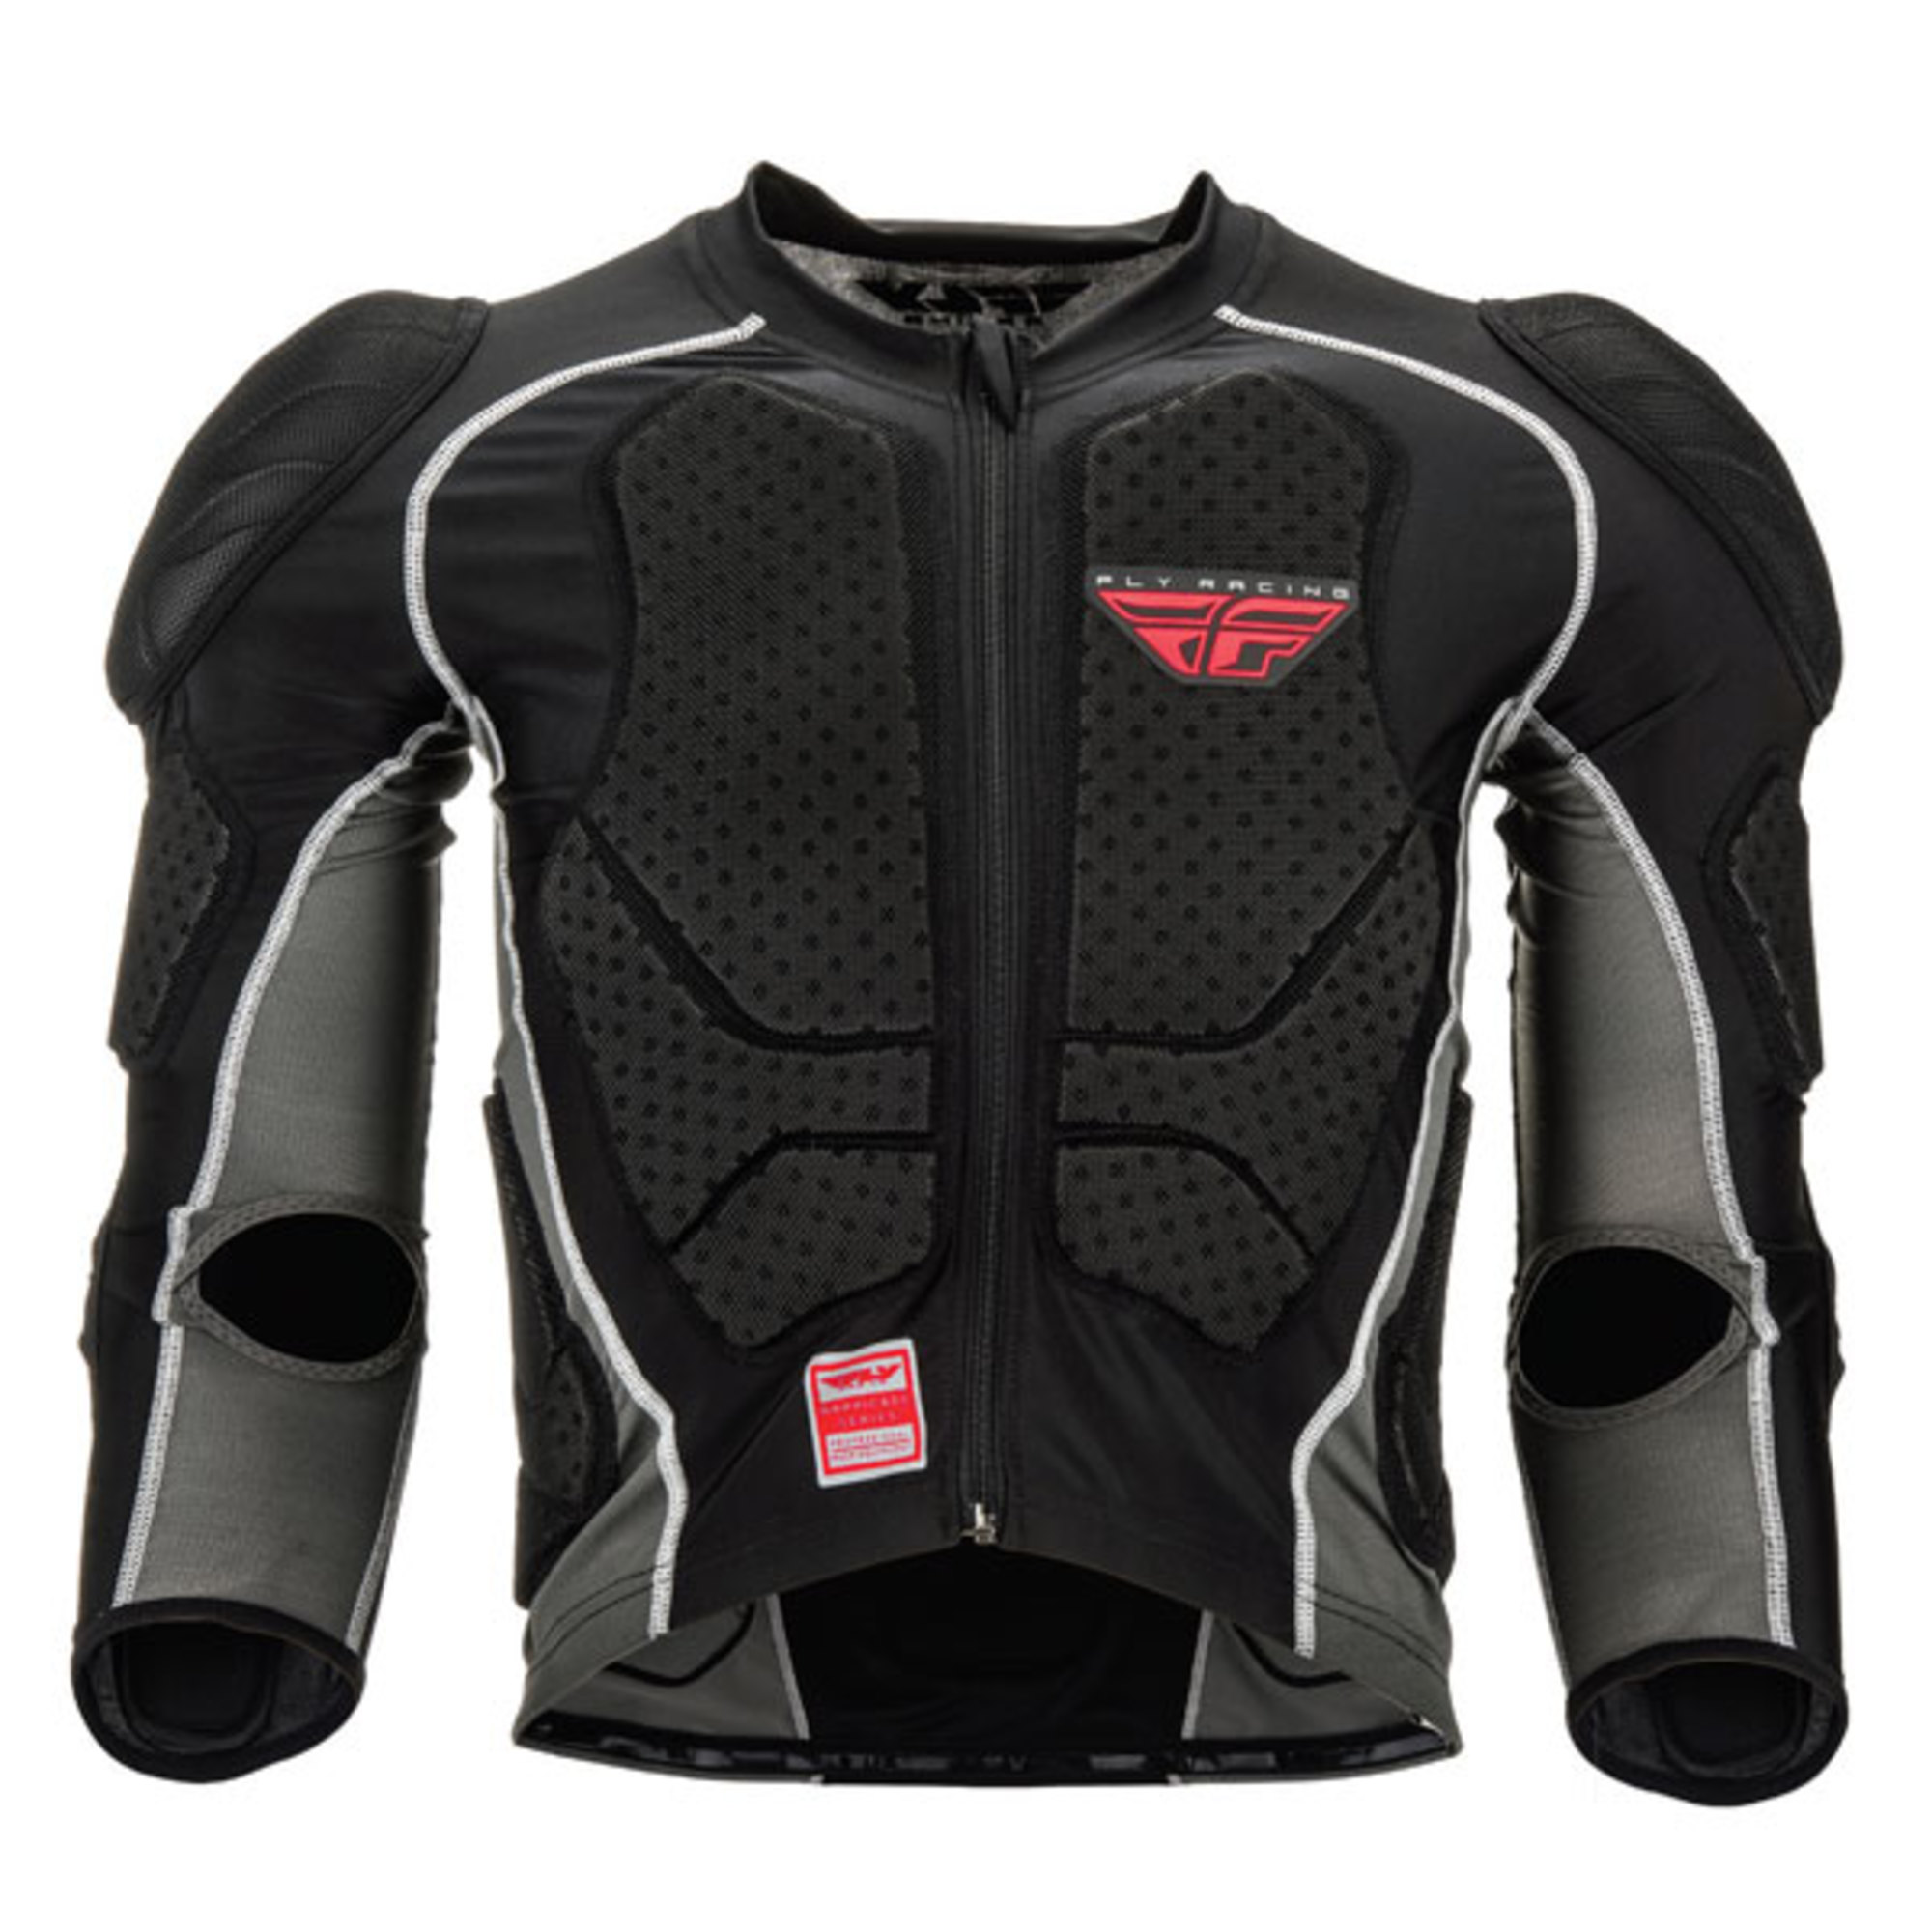 motocross protections plastrons par fly racing pour enfants barricade long sleeve